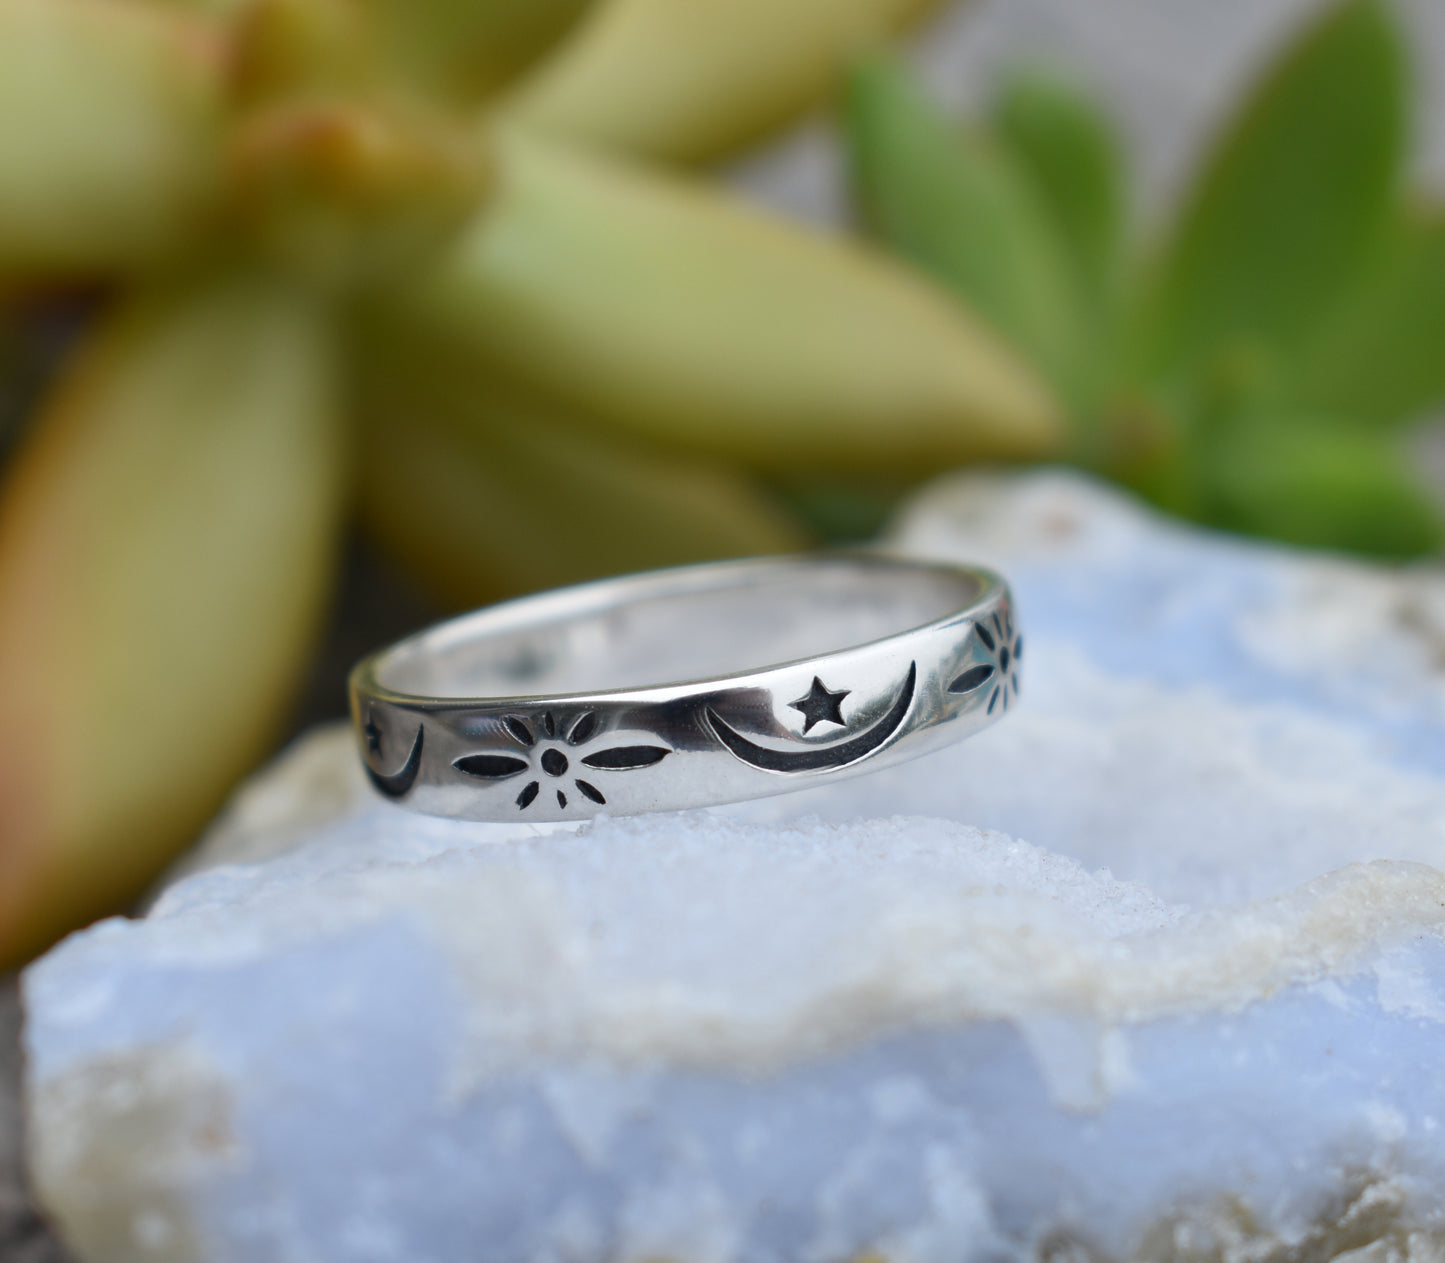 Celestial Moon Ring- Stars Ring, Eternity Ring Band- Sterling Silver Moon Ring